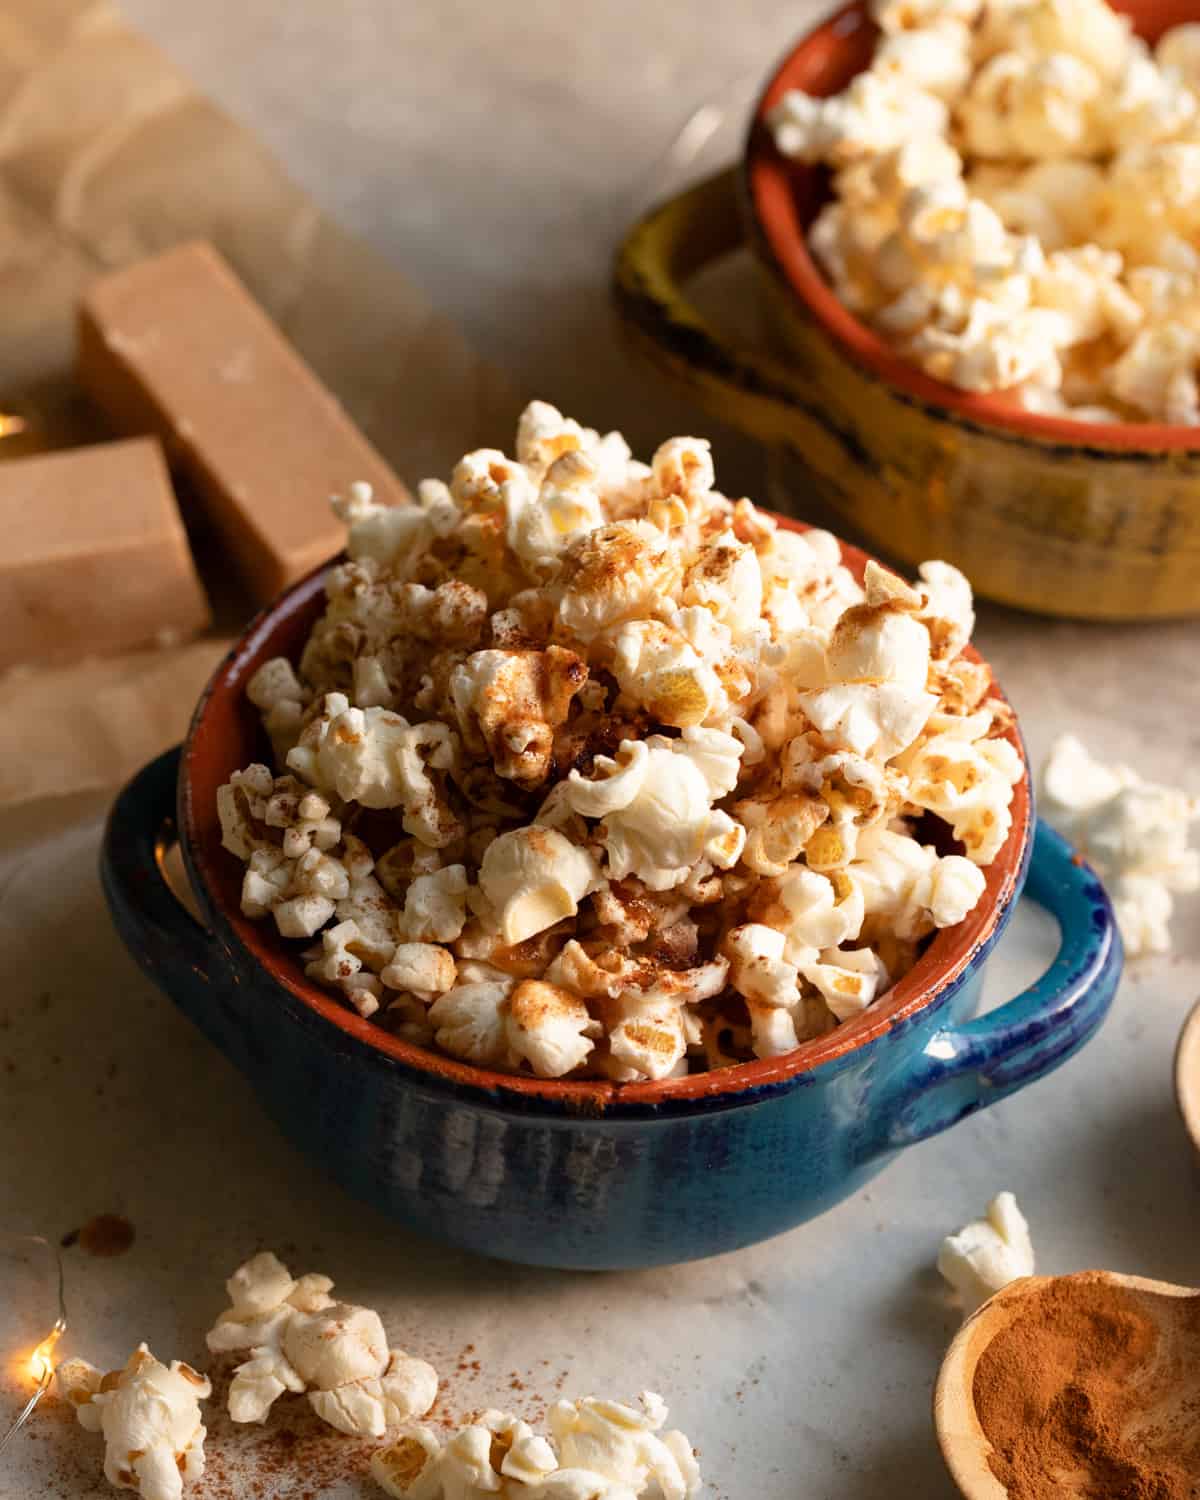 A bowl of vegan cinnamon popcorn. The image is cozy and festive.